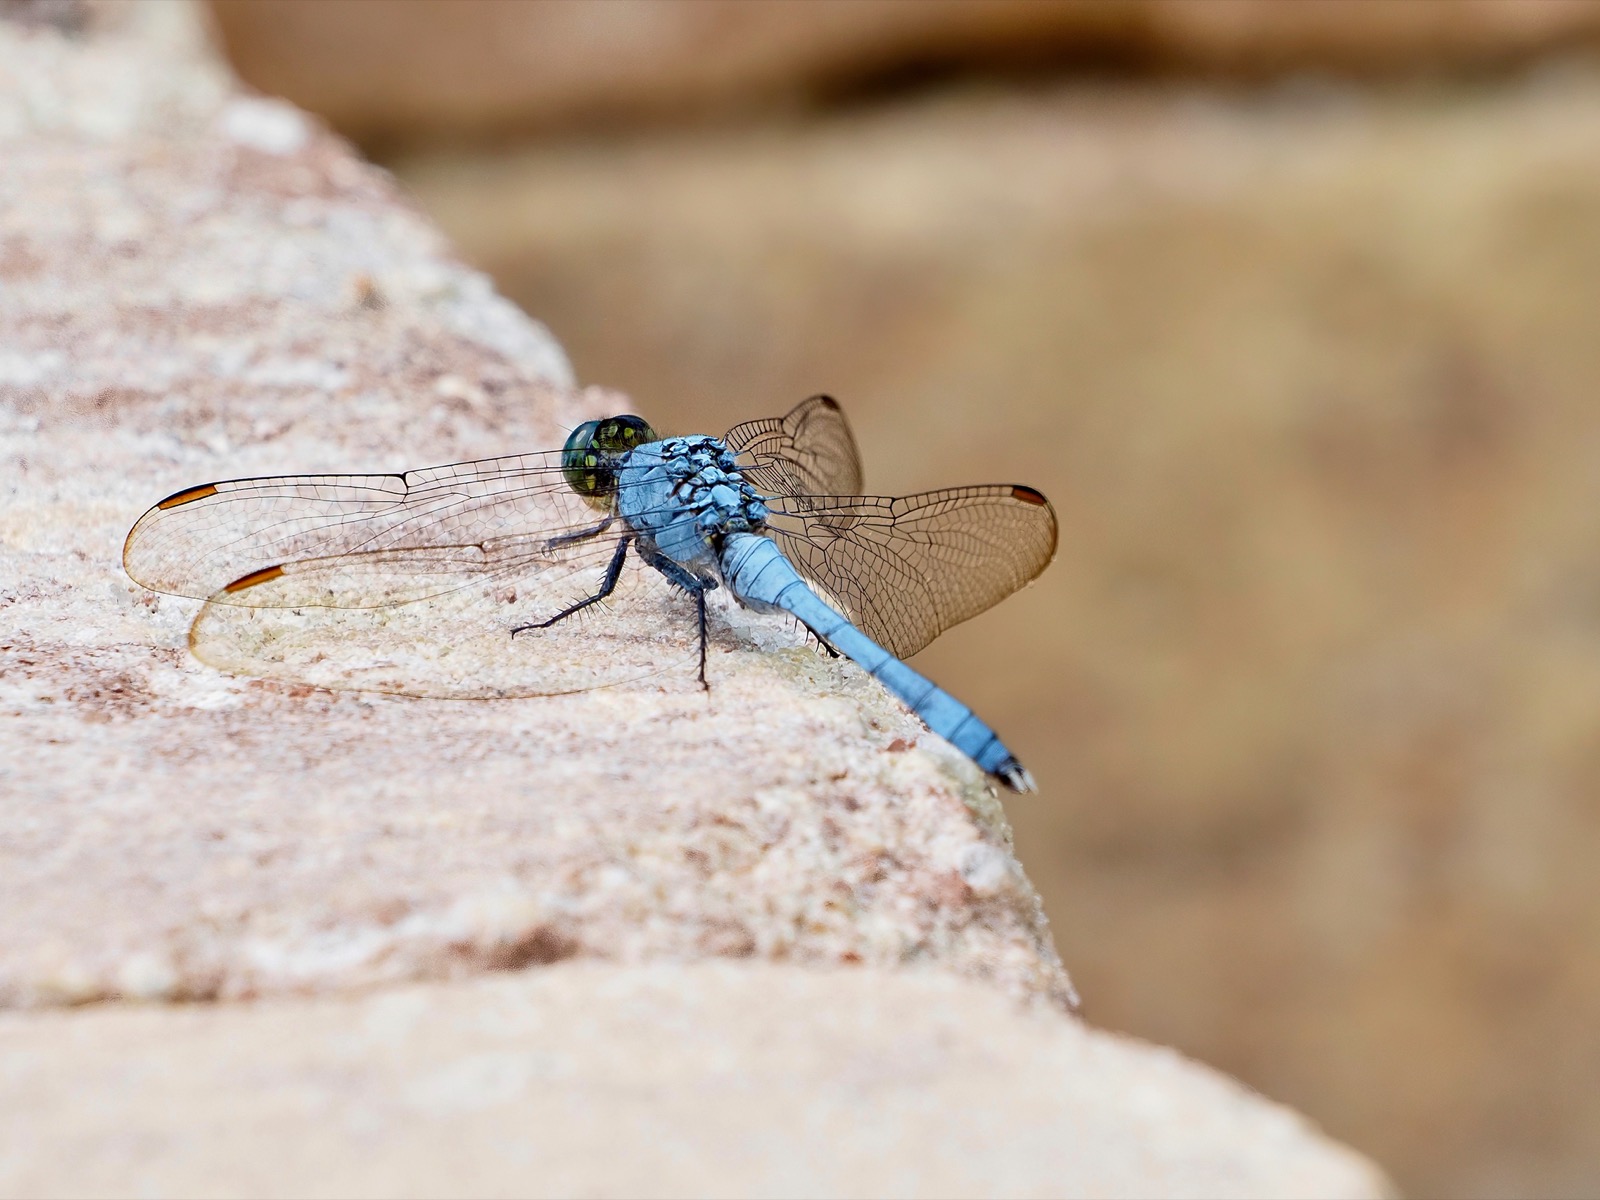 Closeup view of male eastern pondhawk dragonfly perched on a paver step.